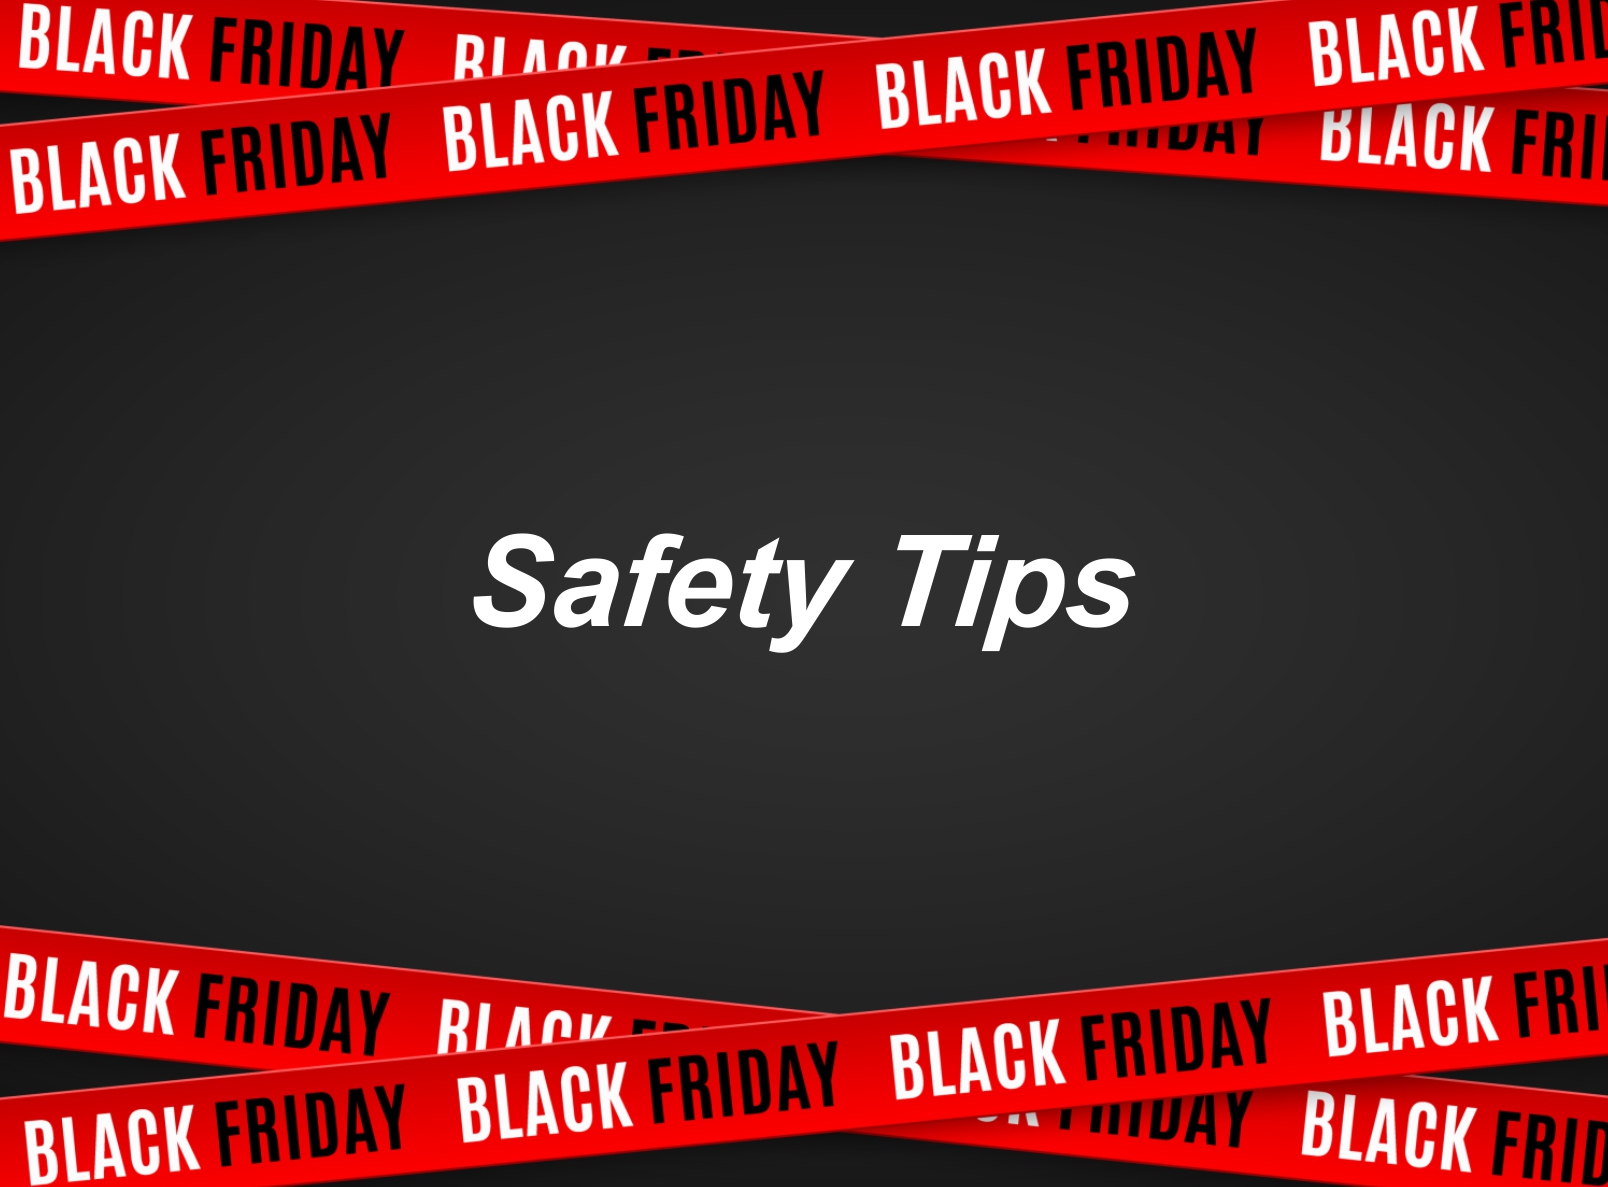 Safety Tips for Black Friday